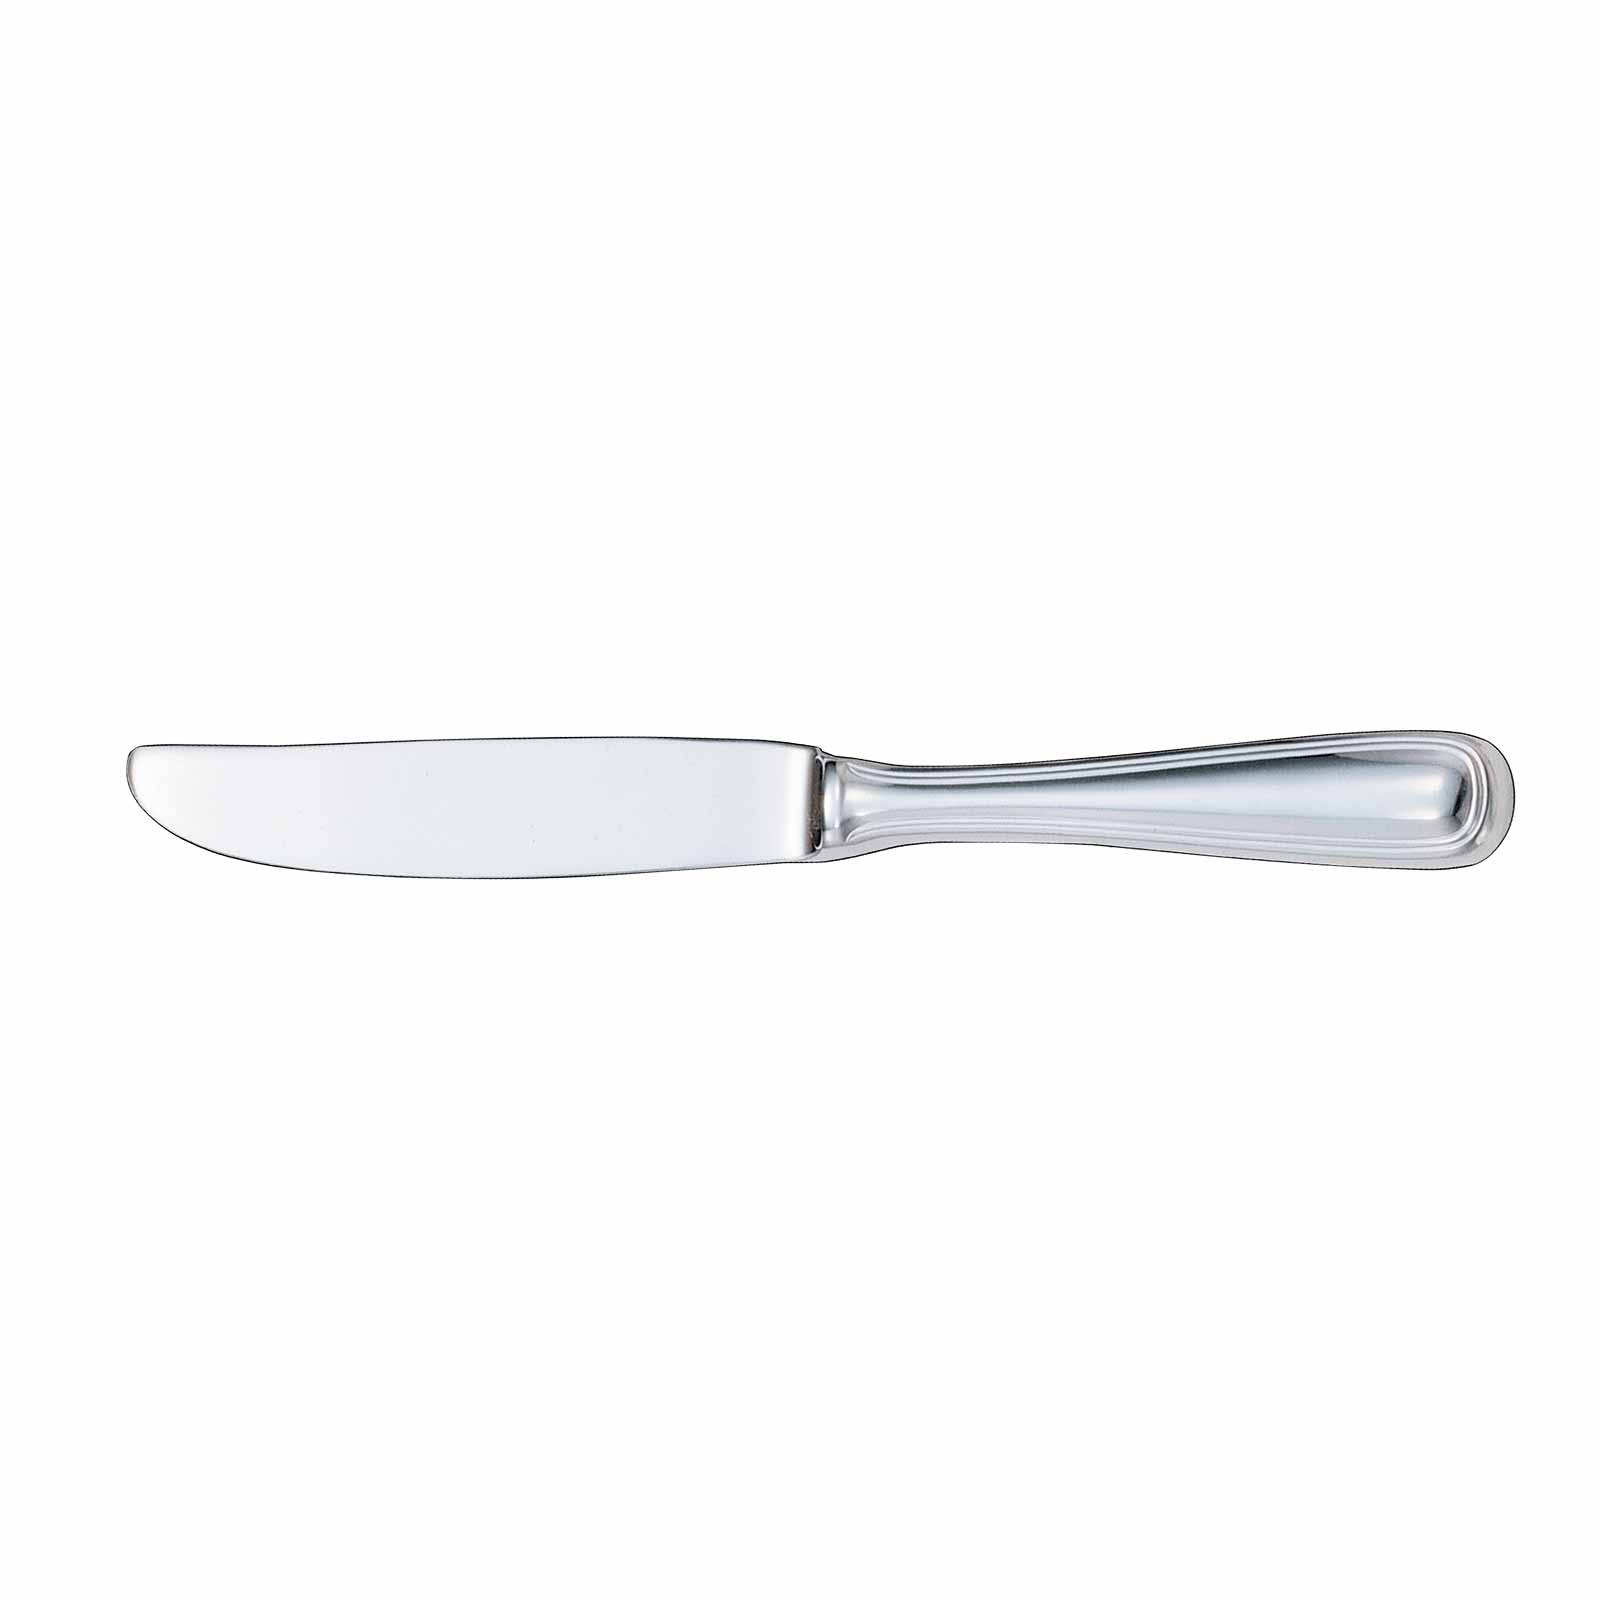 Walco Stainless PAC24 Knife, Dinner